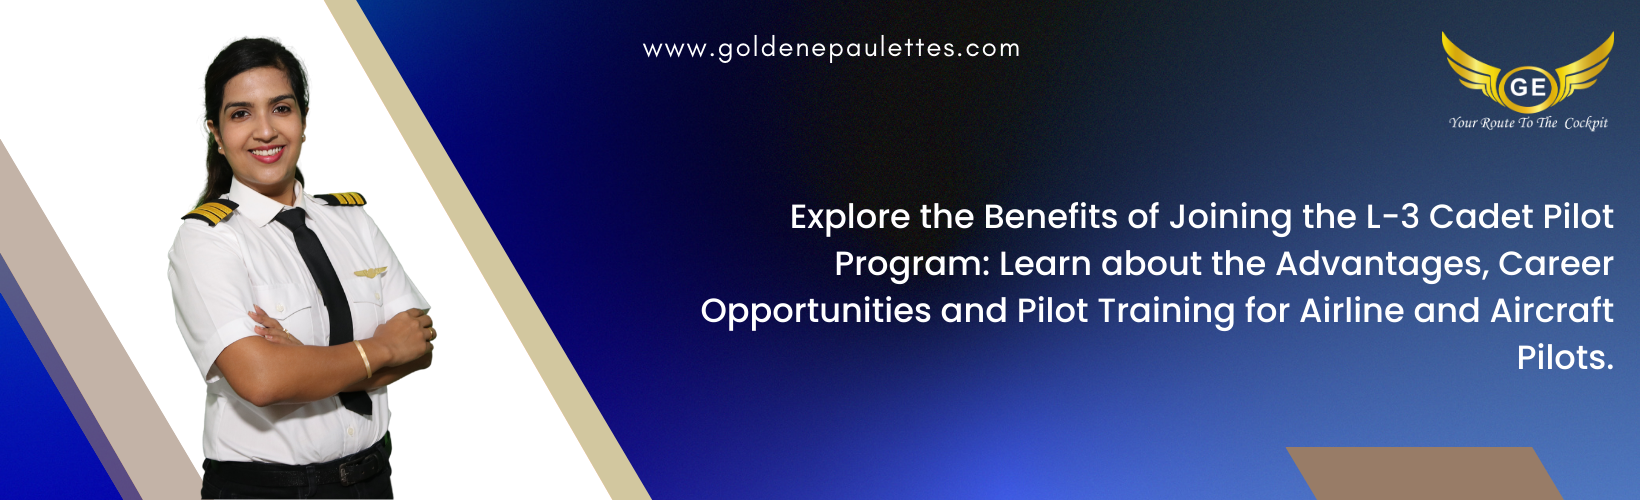 The Benefits of Joining the L-3 Cadet Pilot Program